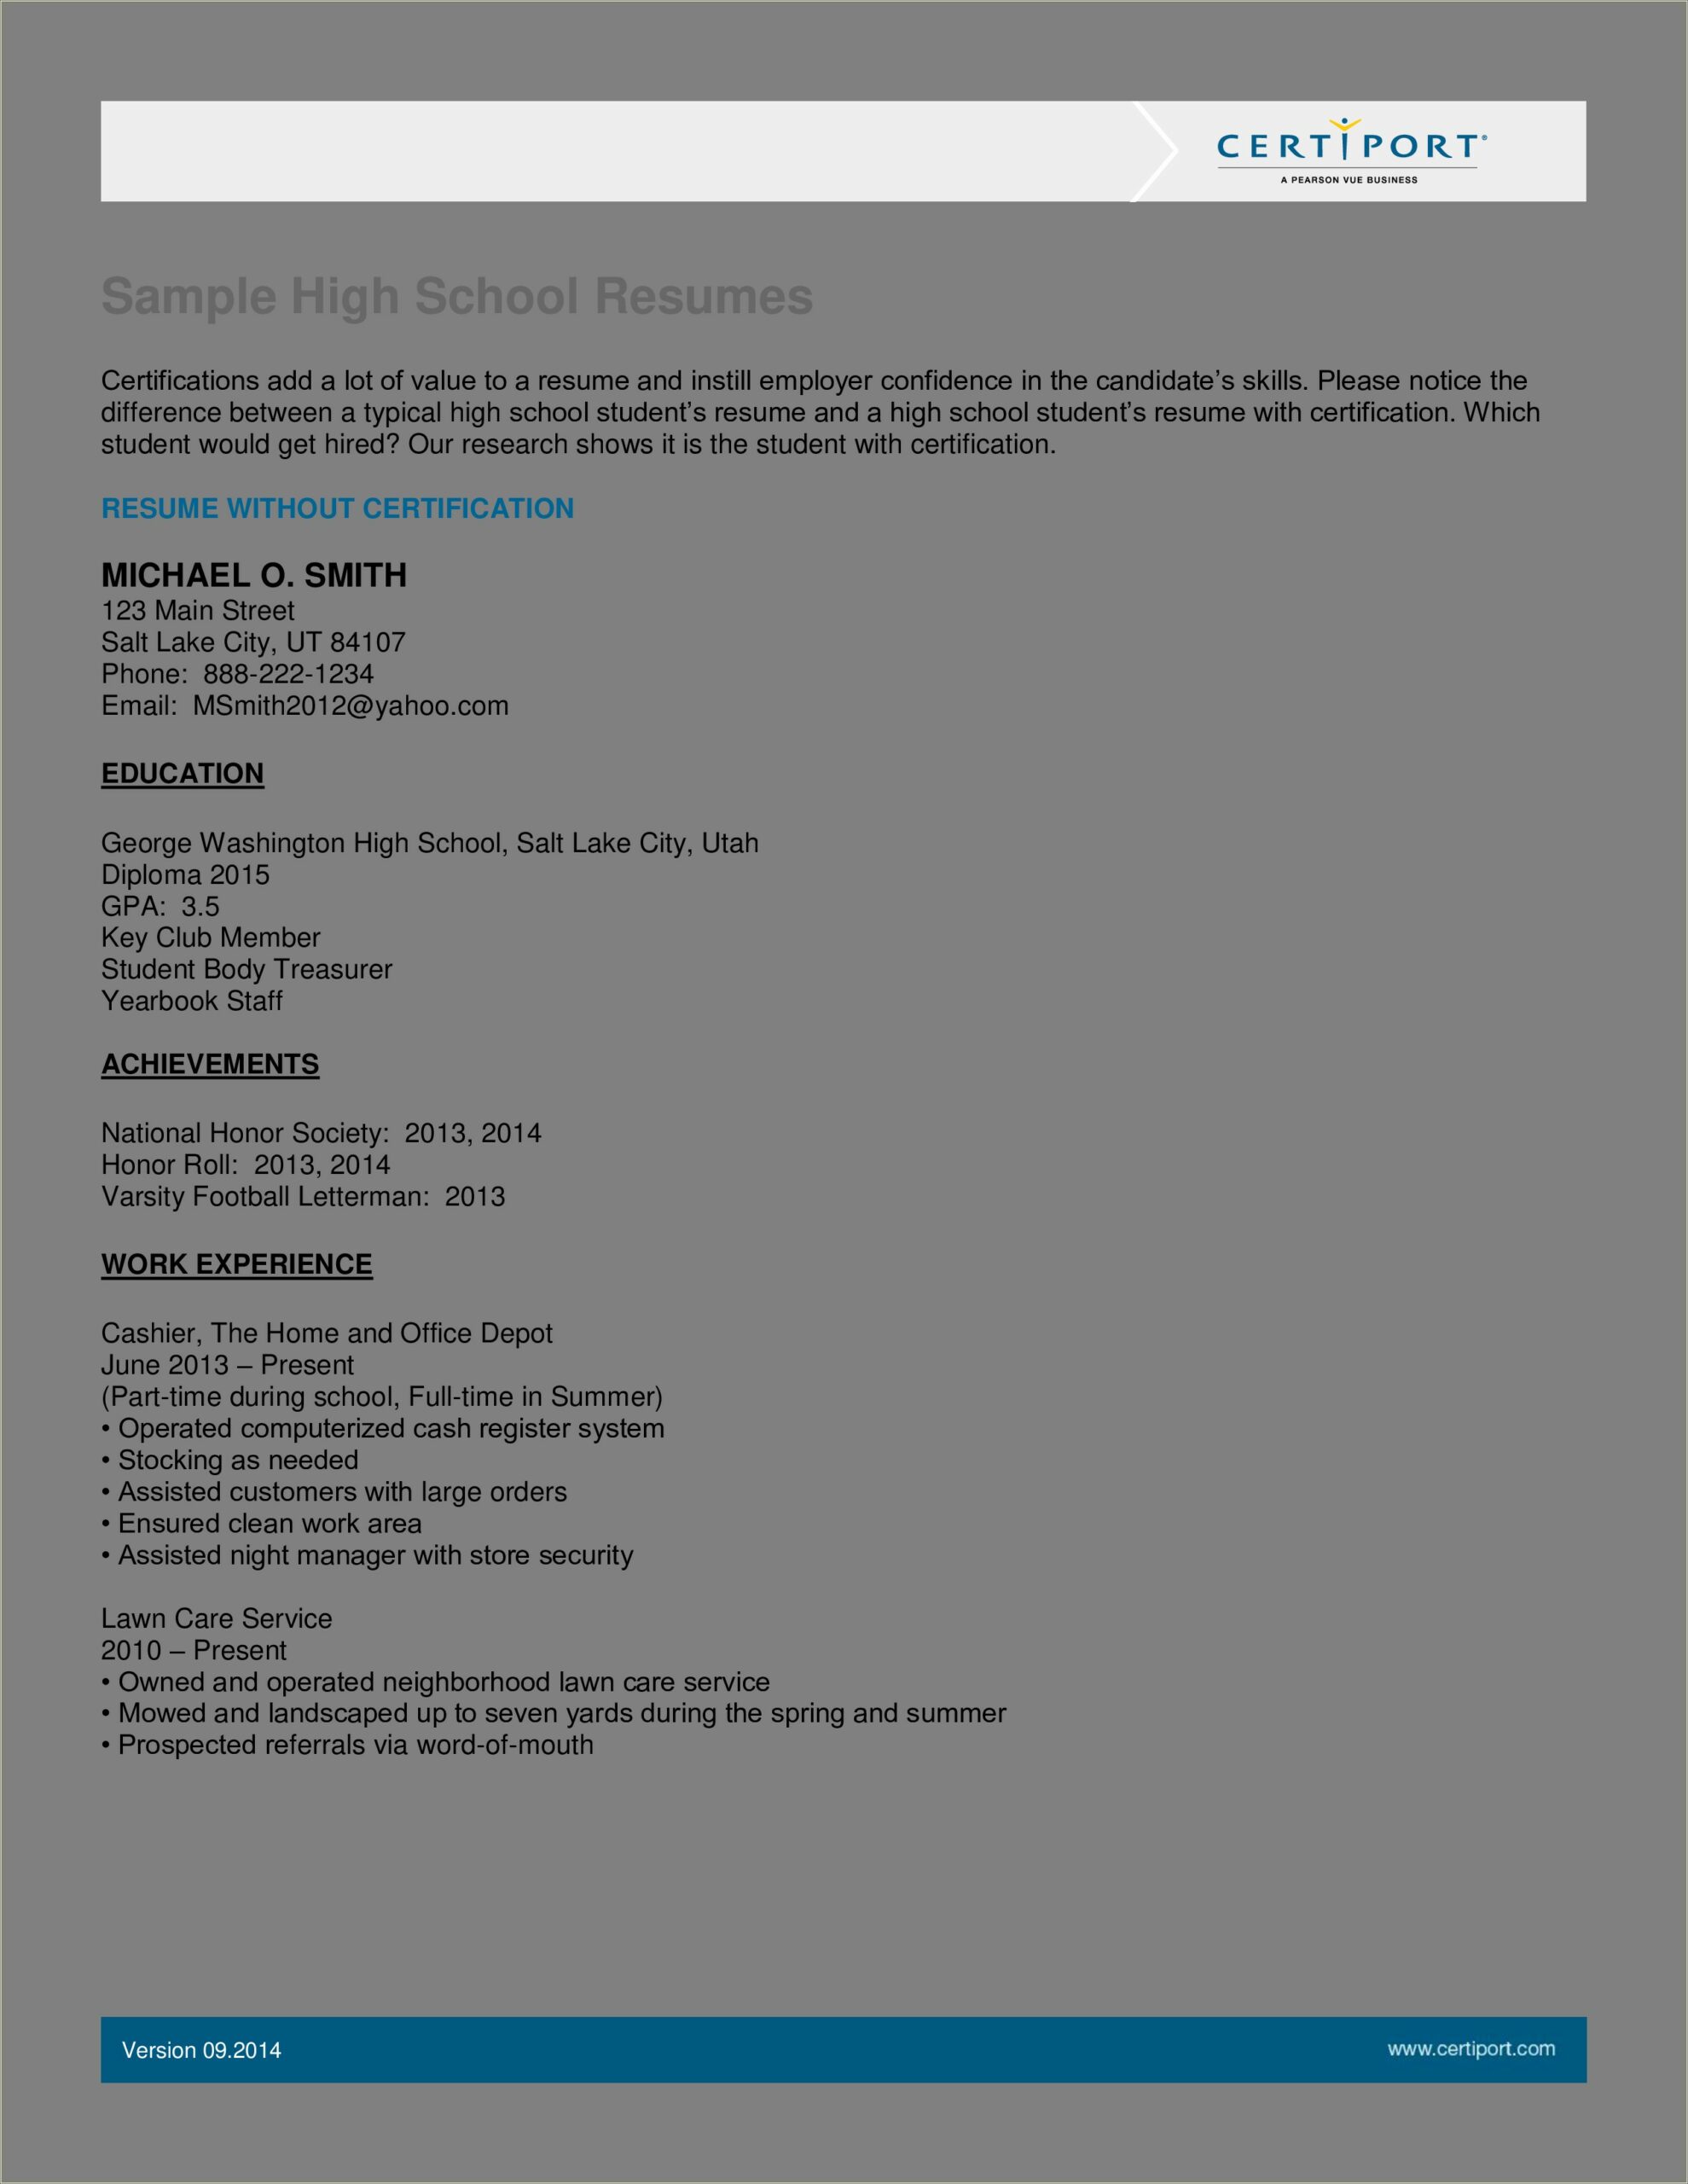 Part Time Teaching Worded On Resume